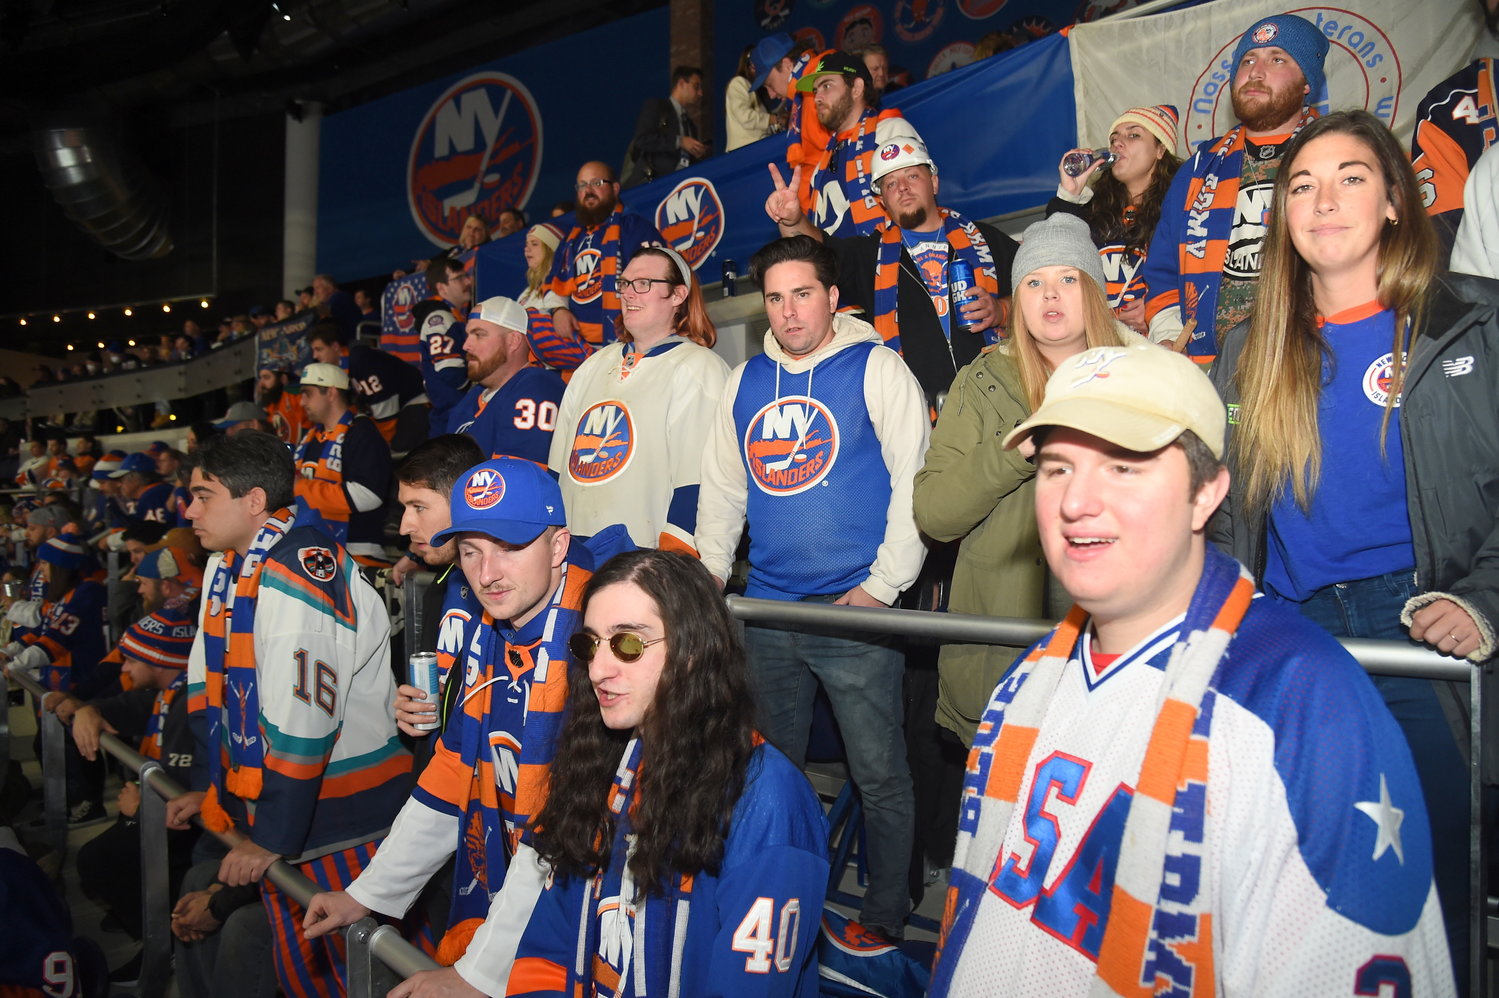 The Blue and Orange Army in Section 329 brought soccer-style chanting throughout the game.